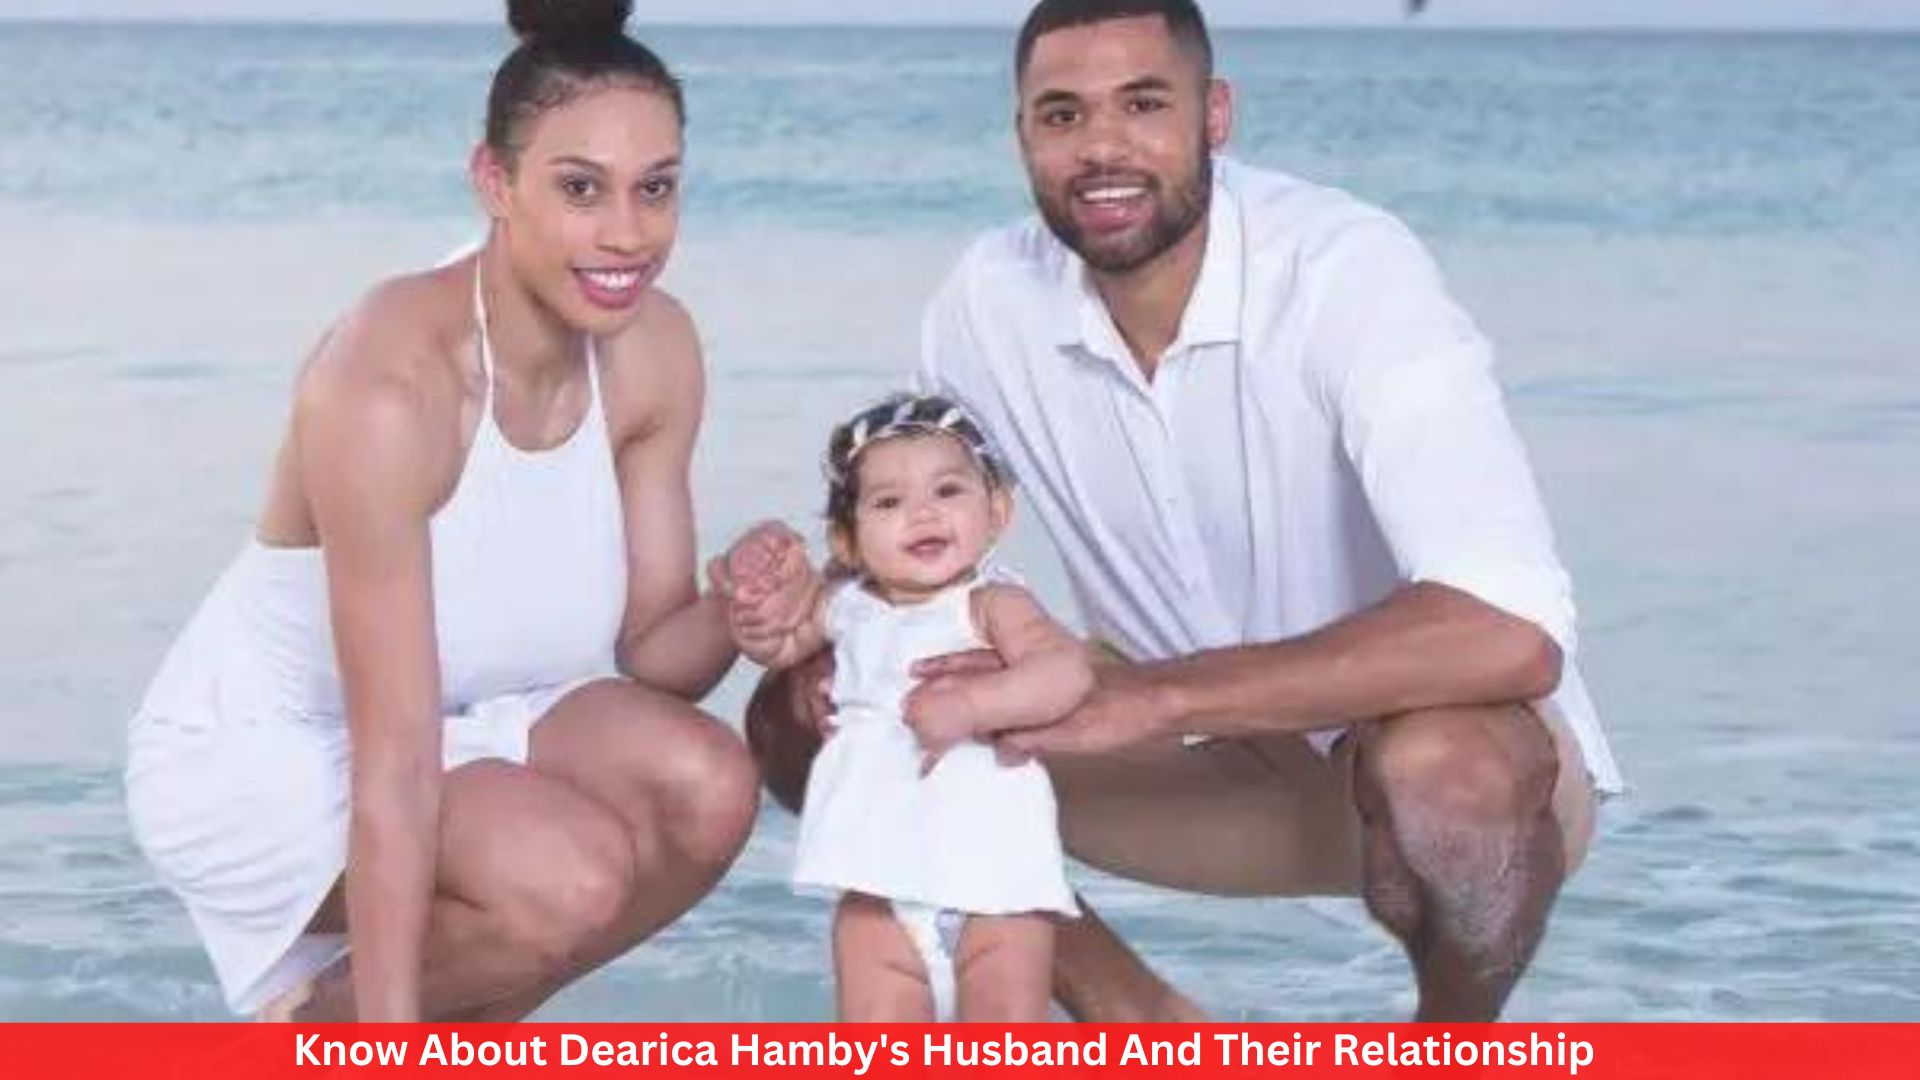 Know About Dearica Hamby's Husband And Their Relationship